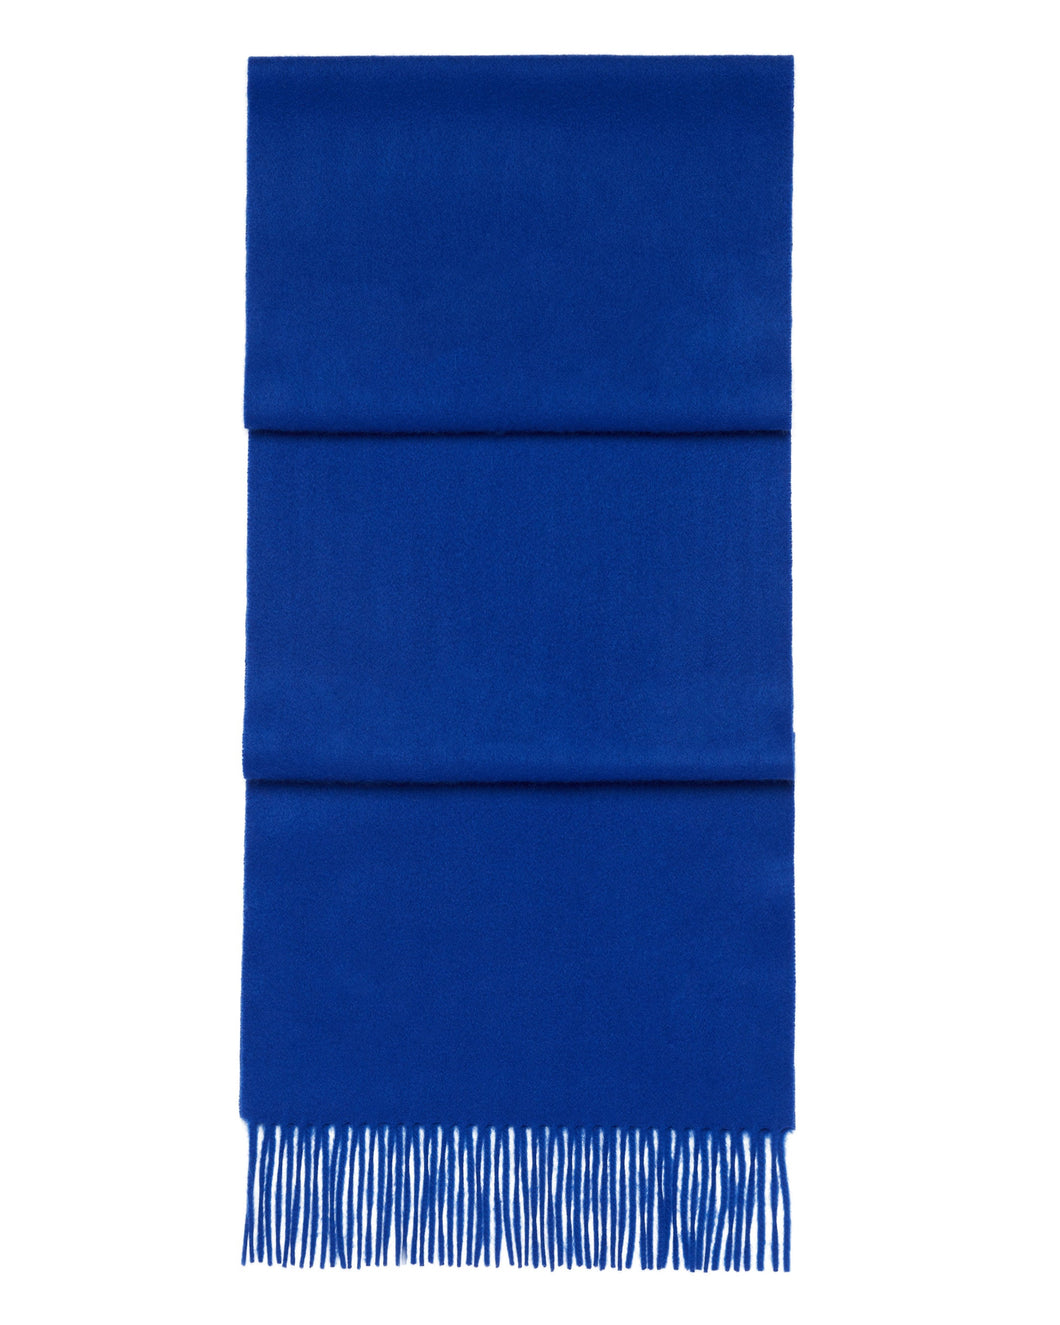 N.Peal Unisex Woven Cashmere Scarf Cobalt Blue